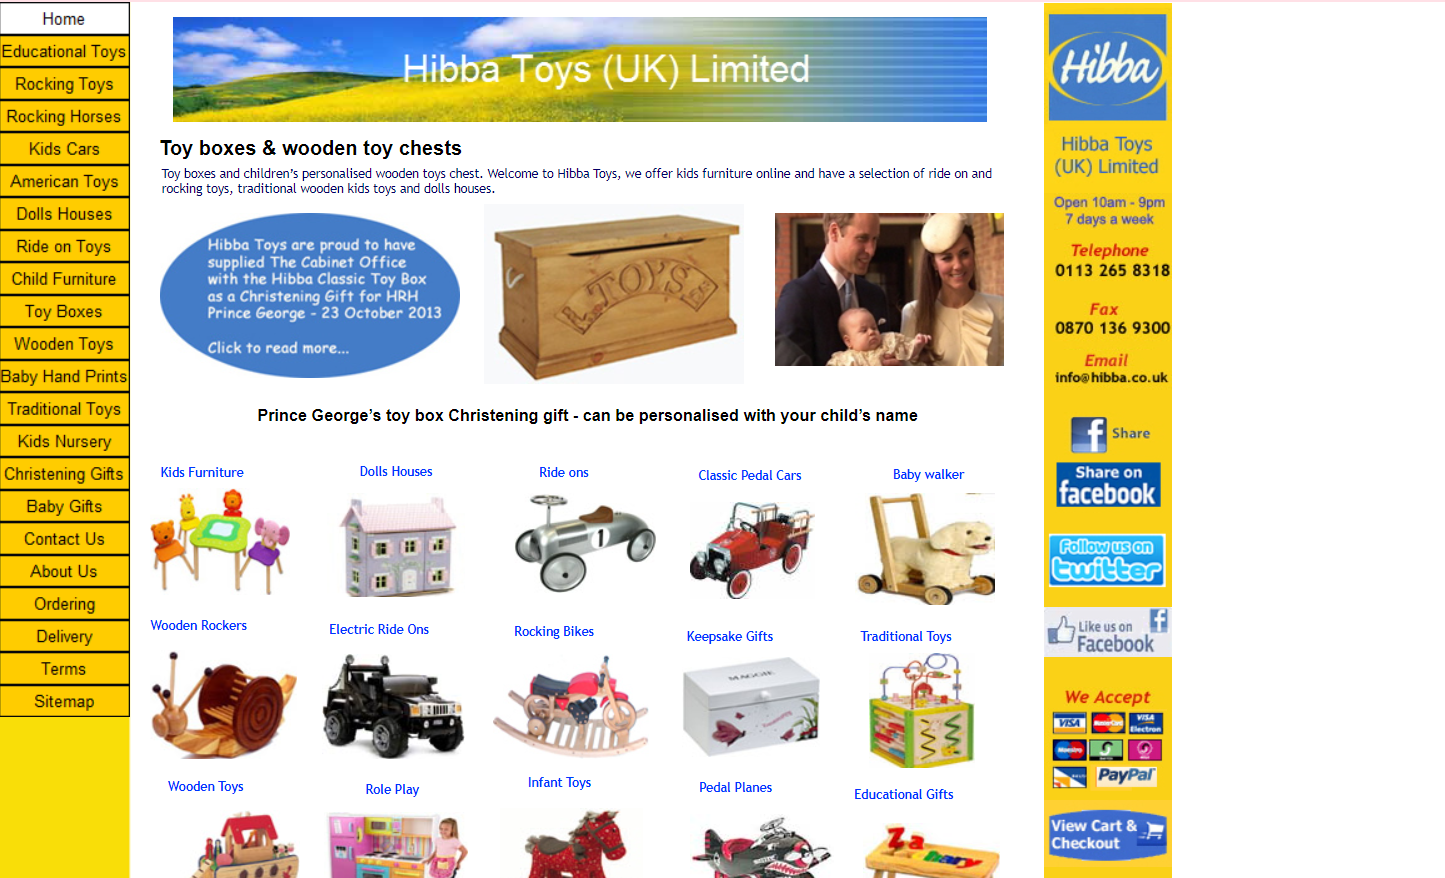 Hibba Toys, based in Leeds, West Yorkshire, is a family-owned business specializing in unique, high-quality wooden toys and gifts. Its distinctive products are perfect for new babies and Christening gifts. 